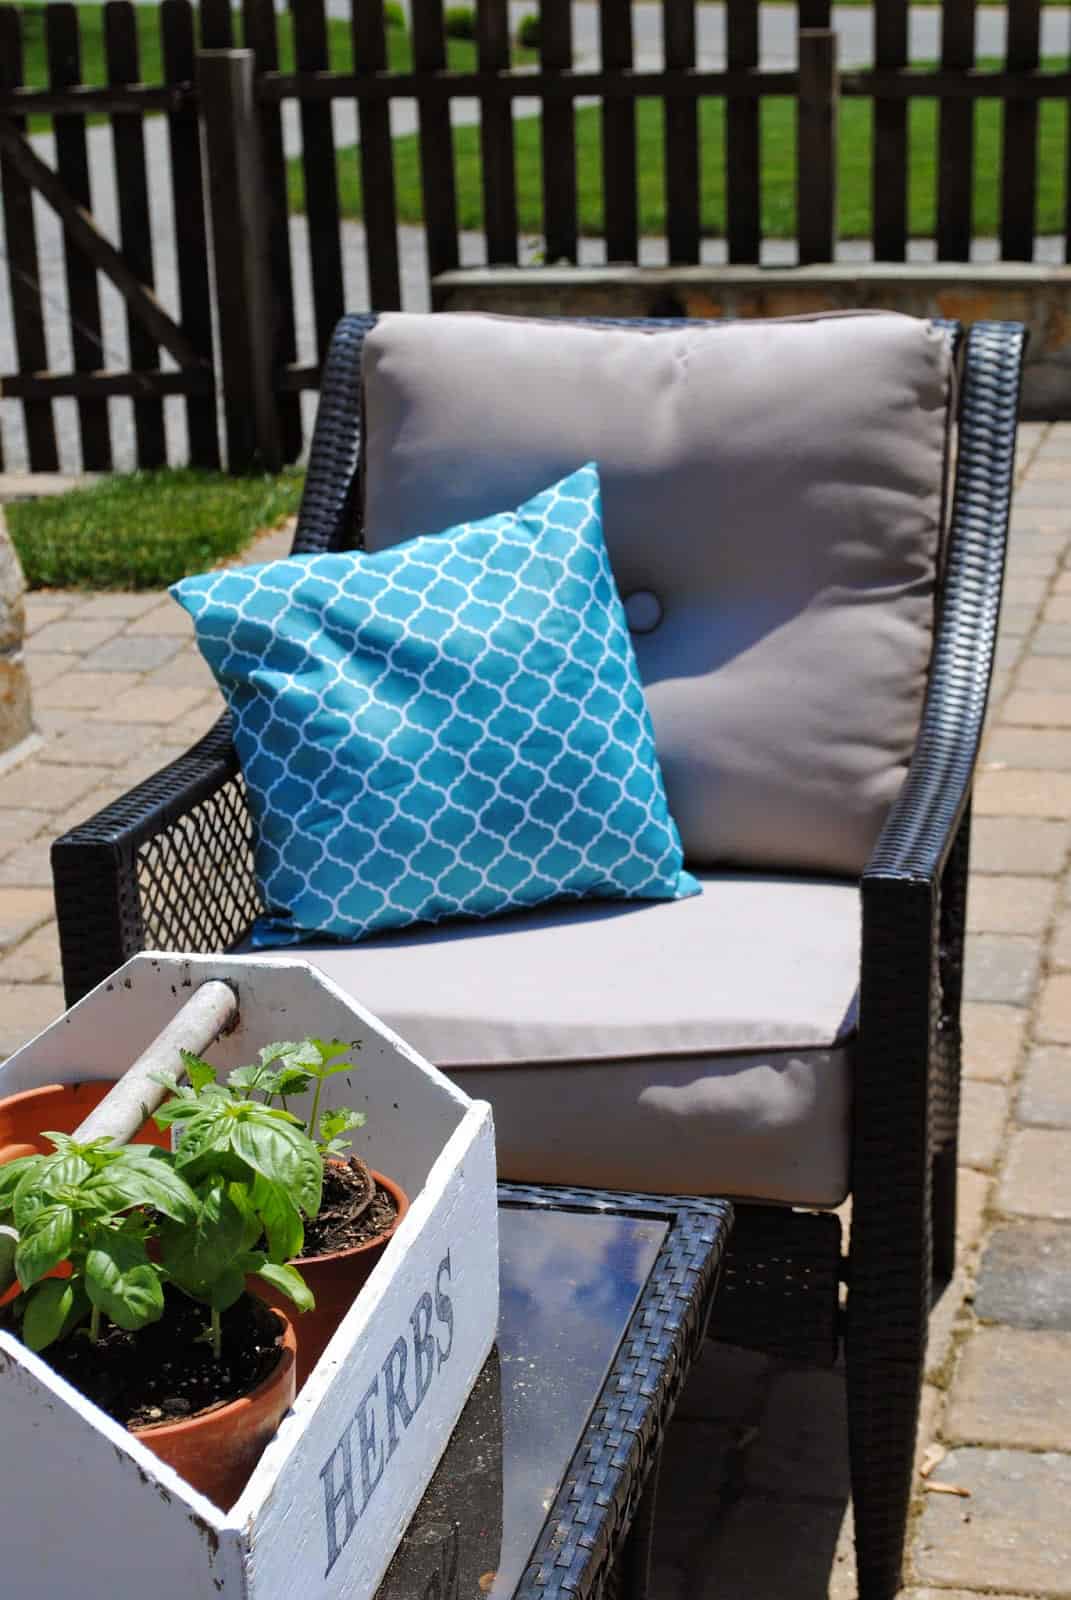 DIY Outdoor Pillows: The 15 Minute Tablecloth and Plastic Bag Method